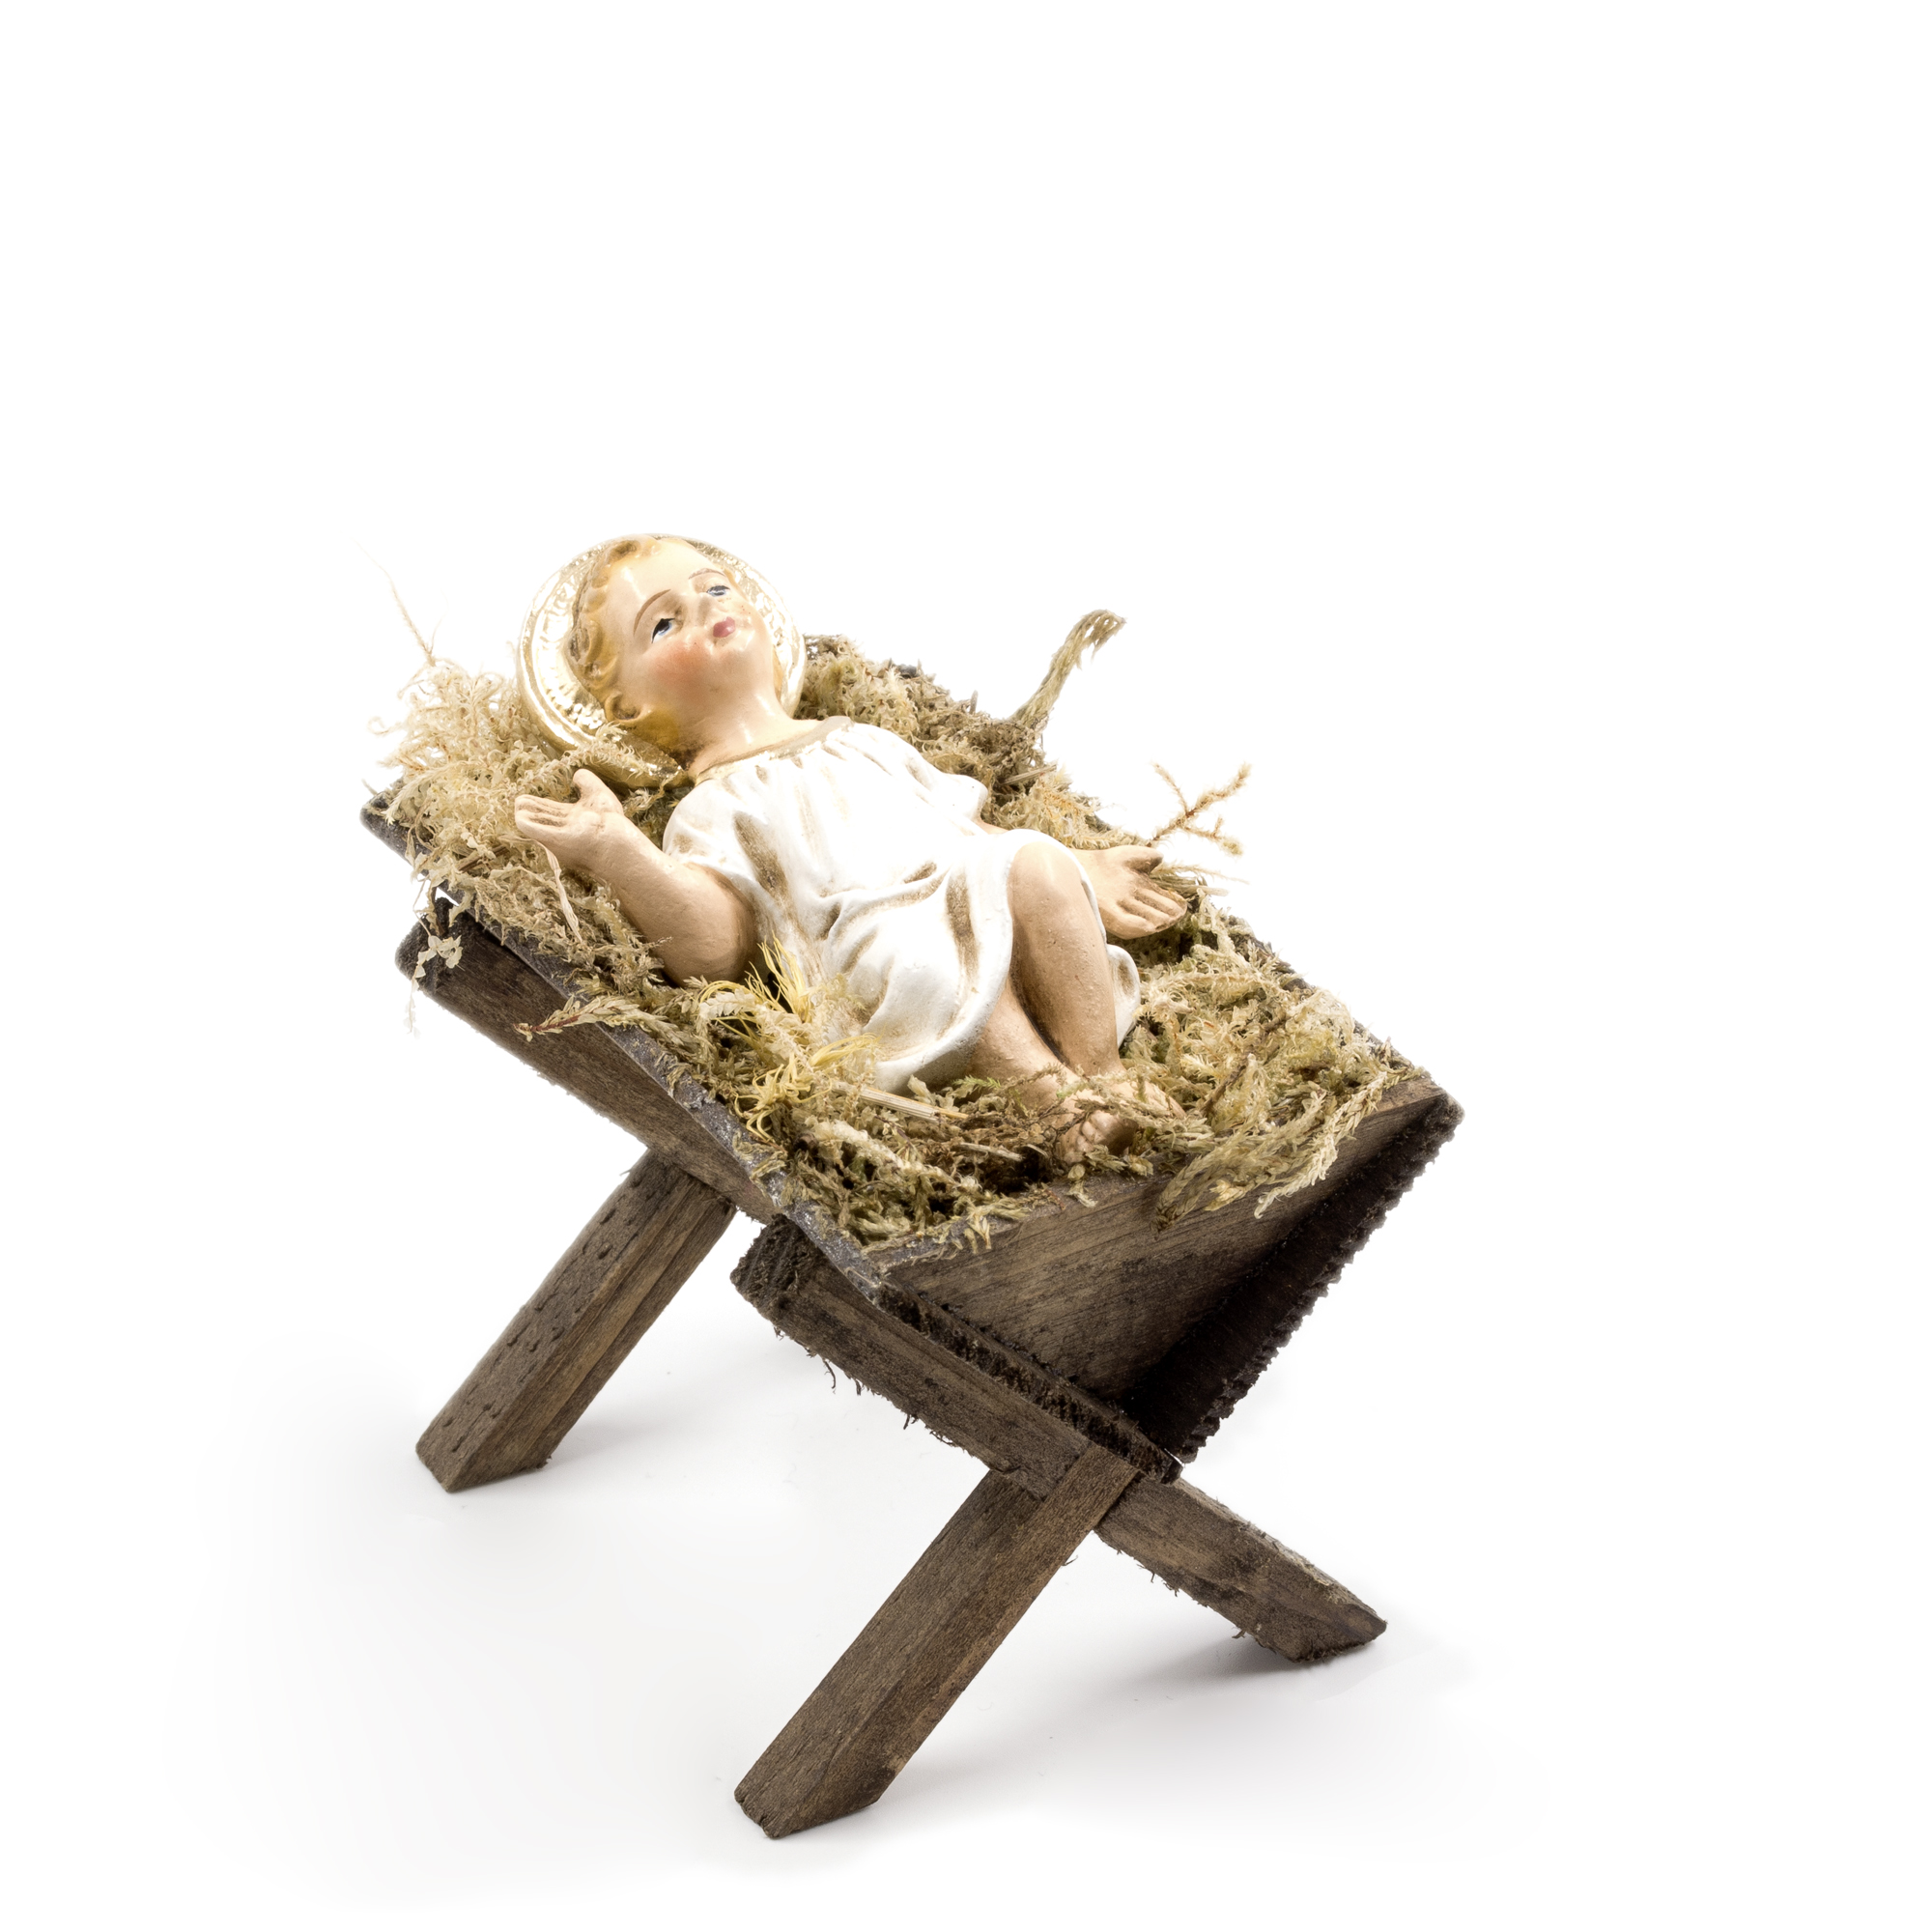 Wooden manger with Baby Jesus, to 8.5 in. figures